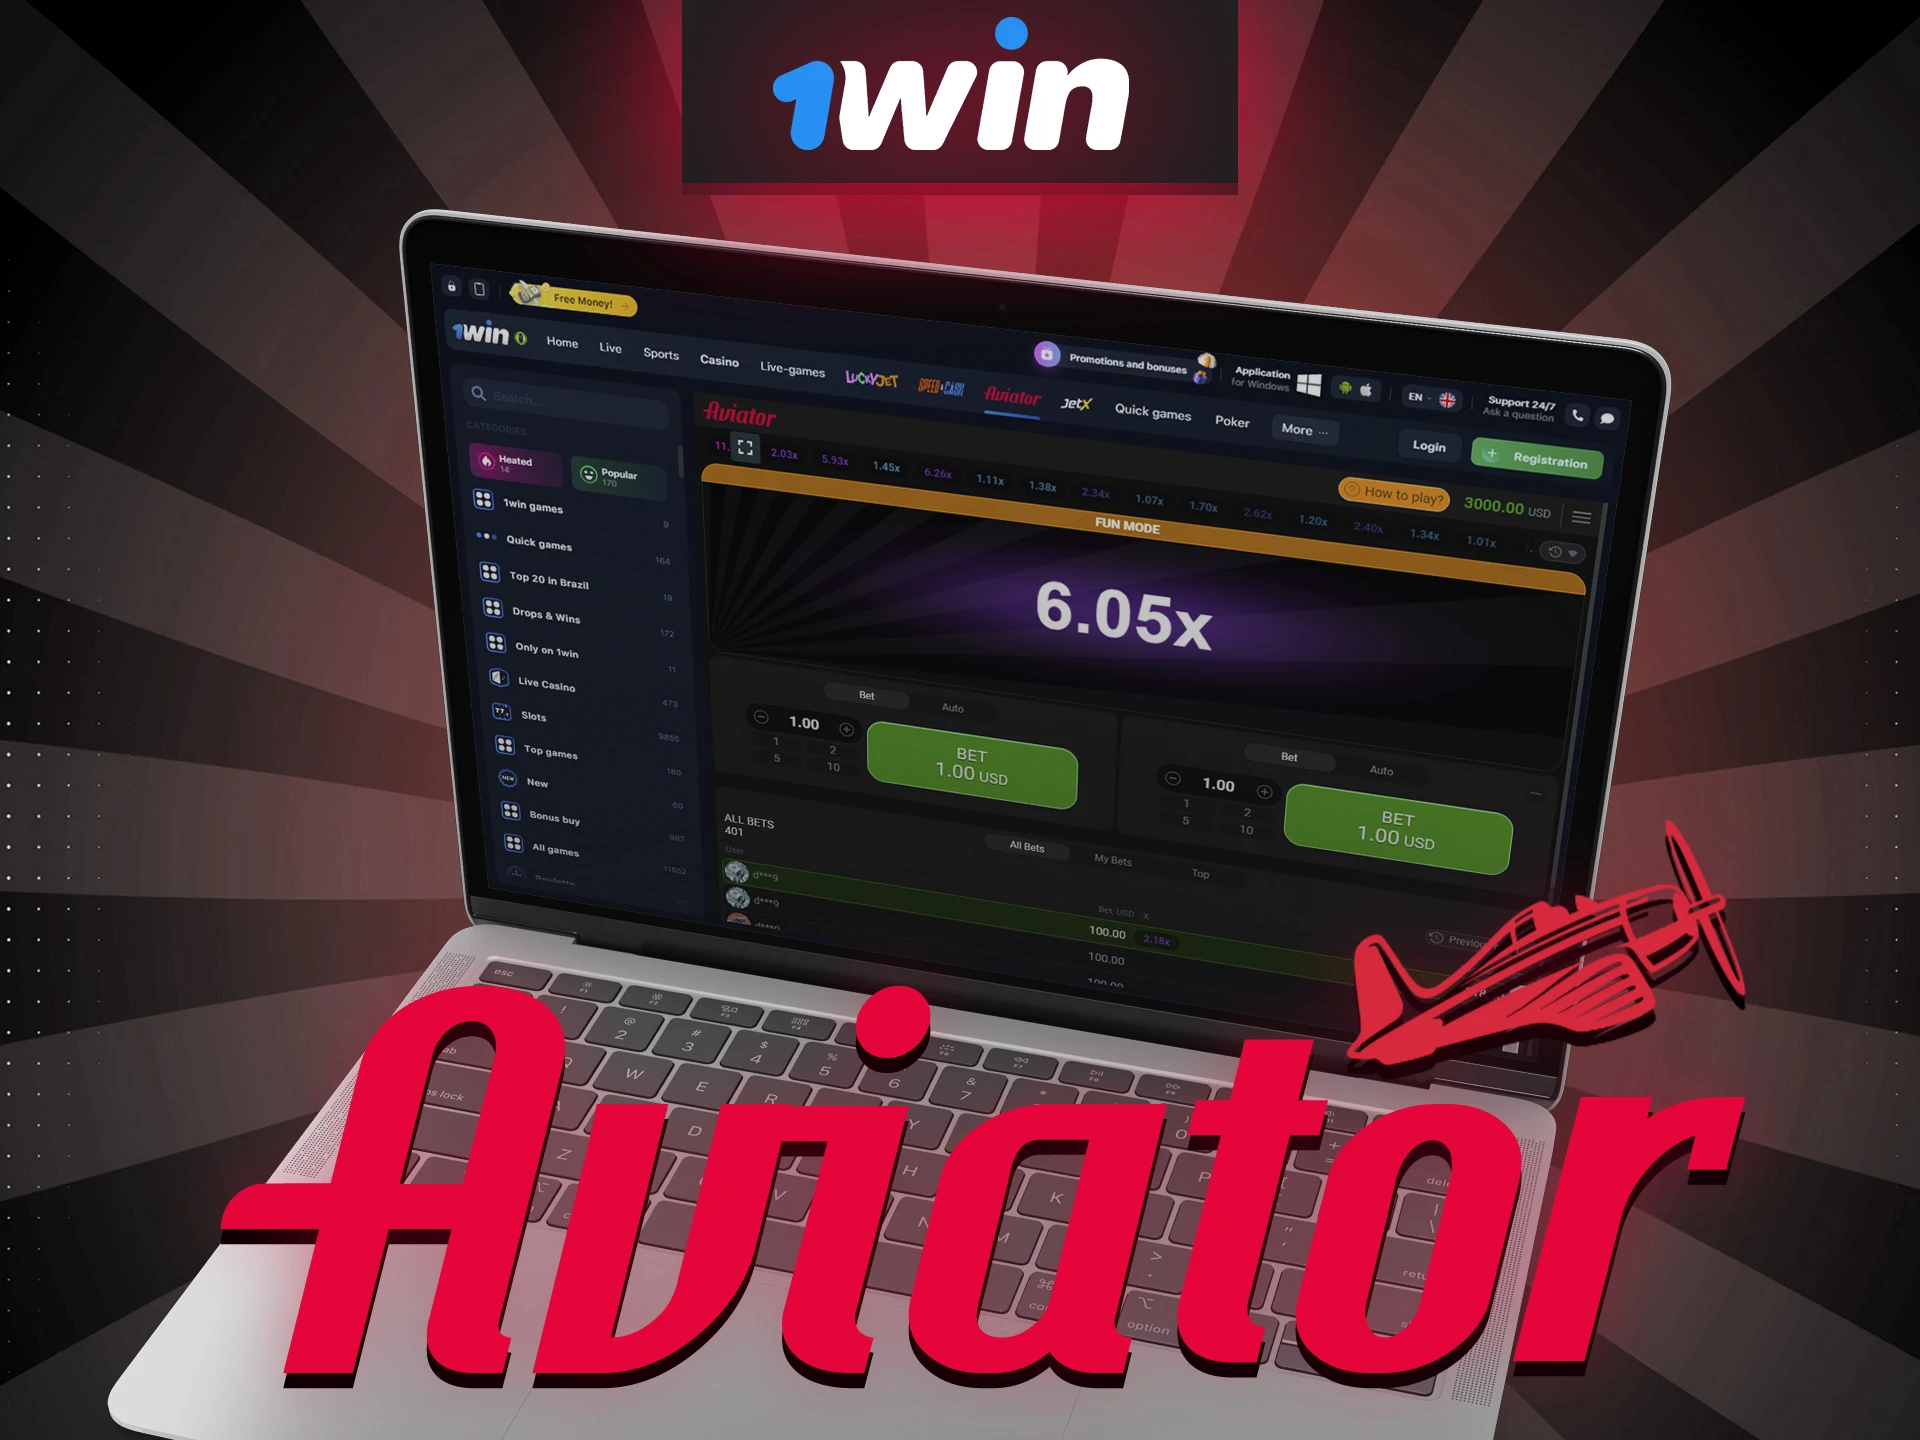 Place your bet on the Aviator game at 1win.